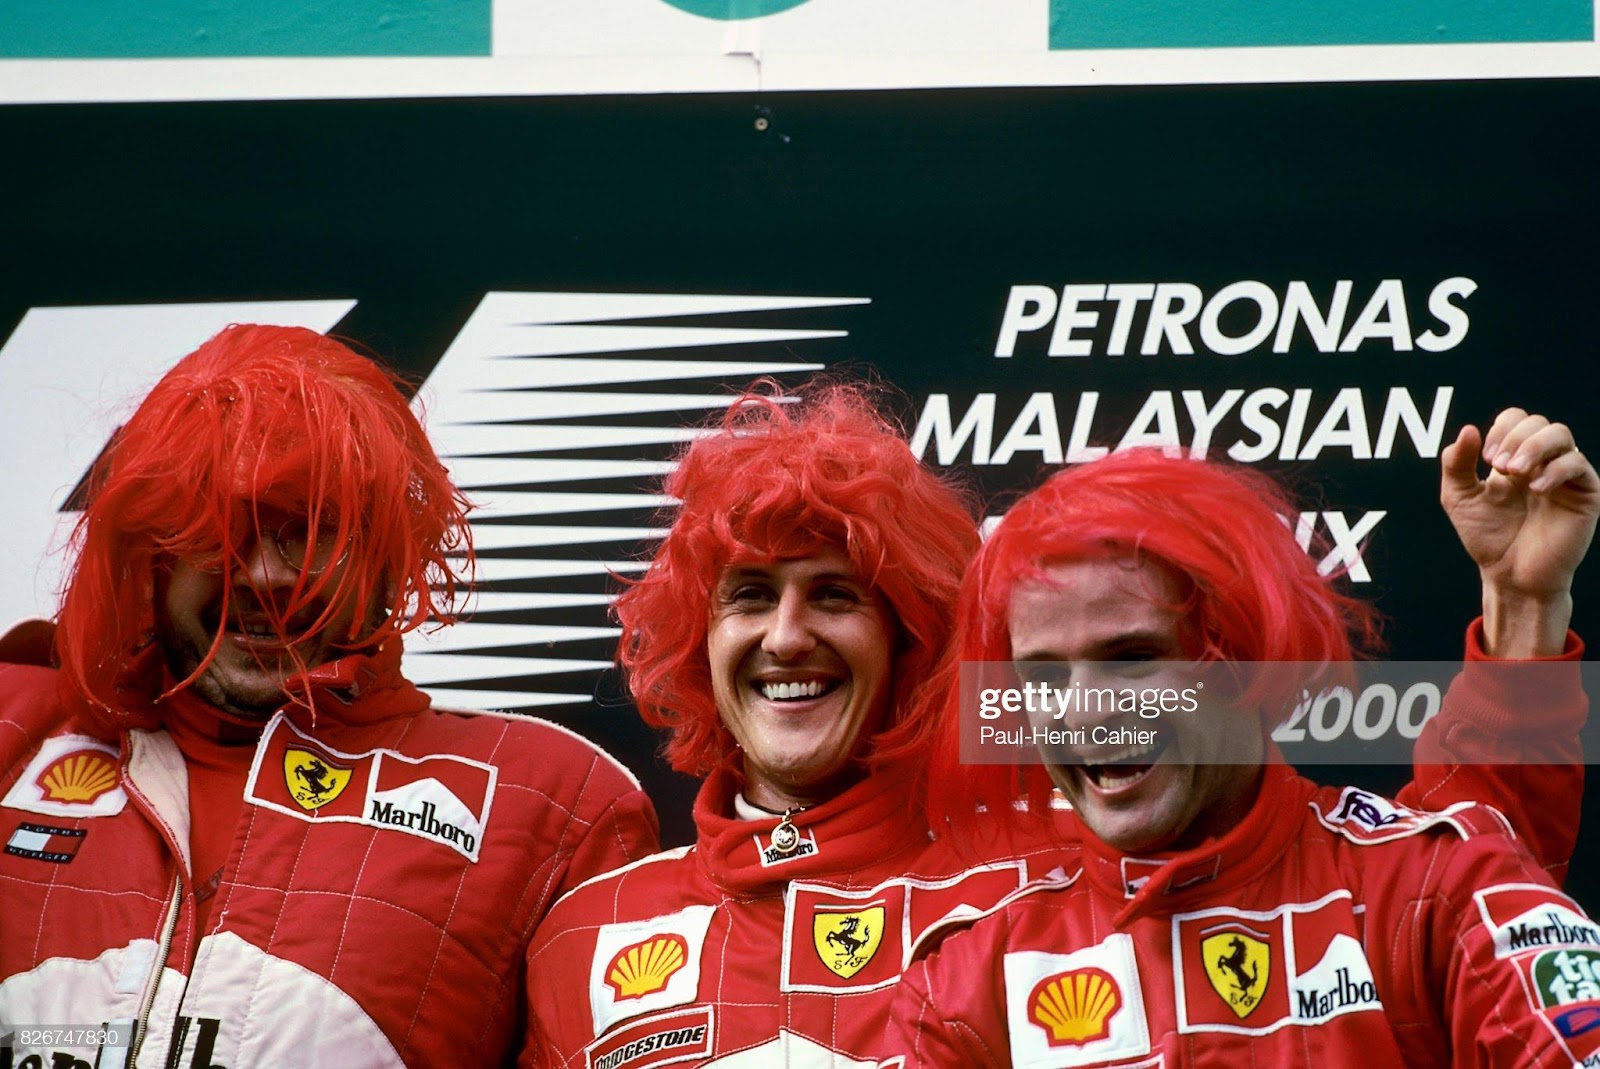 Ross Brawn, Michael Schumacher and Rubens Barrichello wearing red wigs on the podium of the Grand Prix of Malaysia at Sepang International Circuit on 22 October 2000.